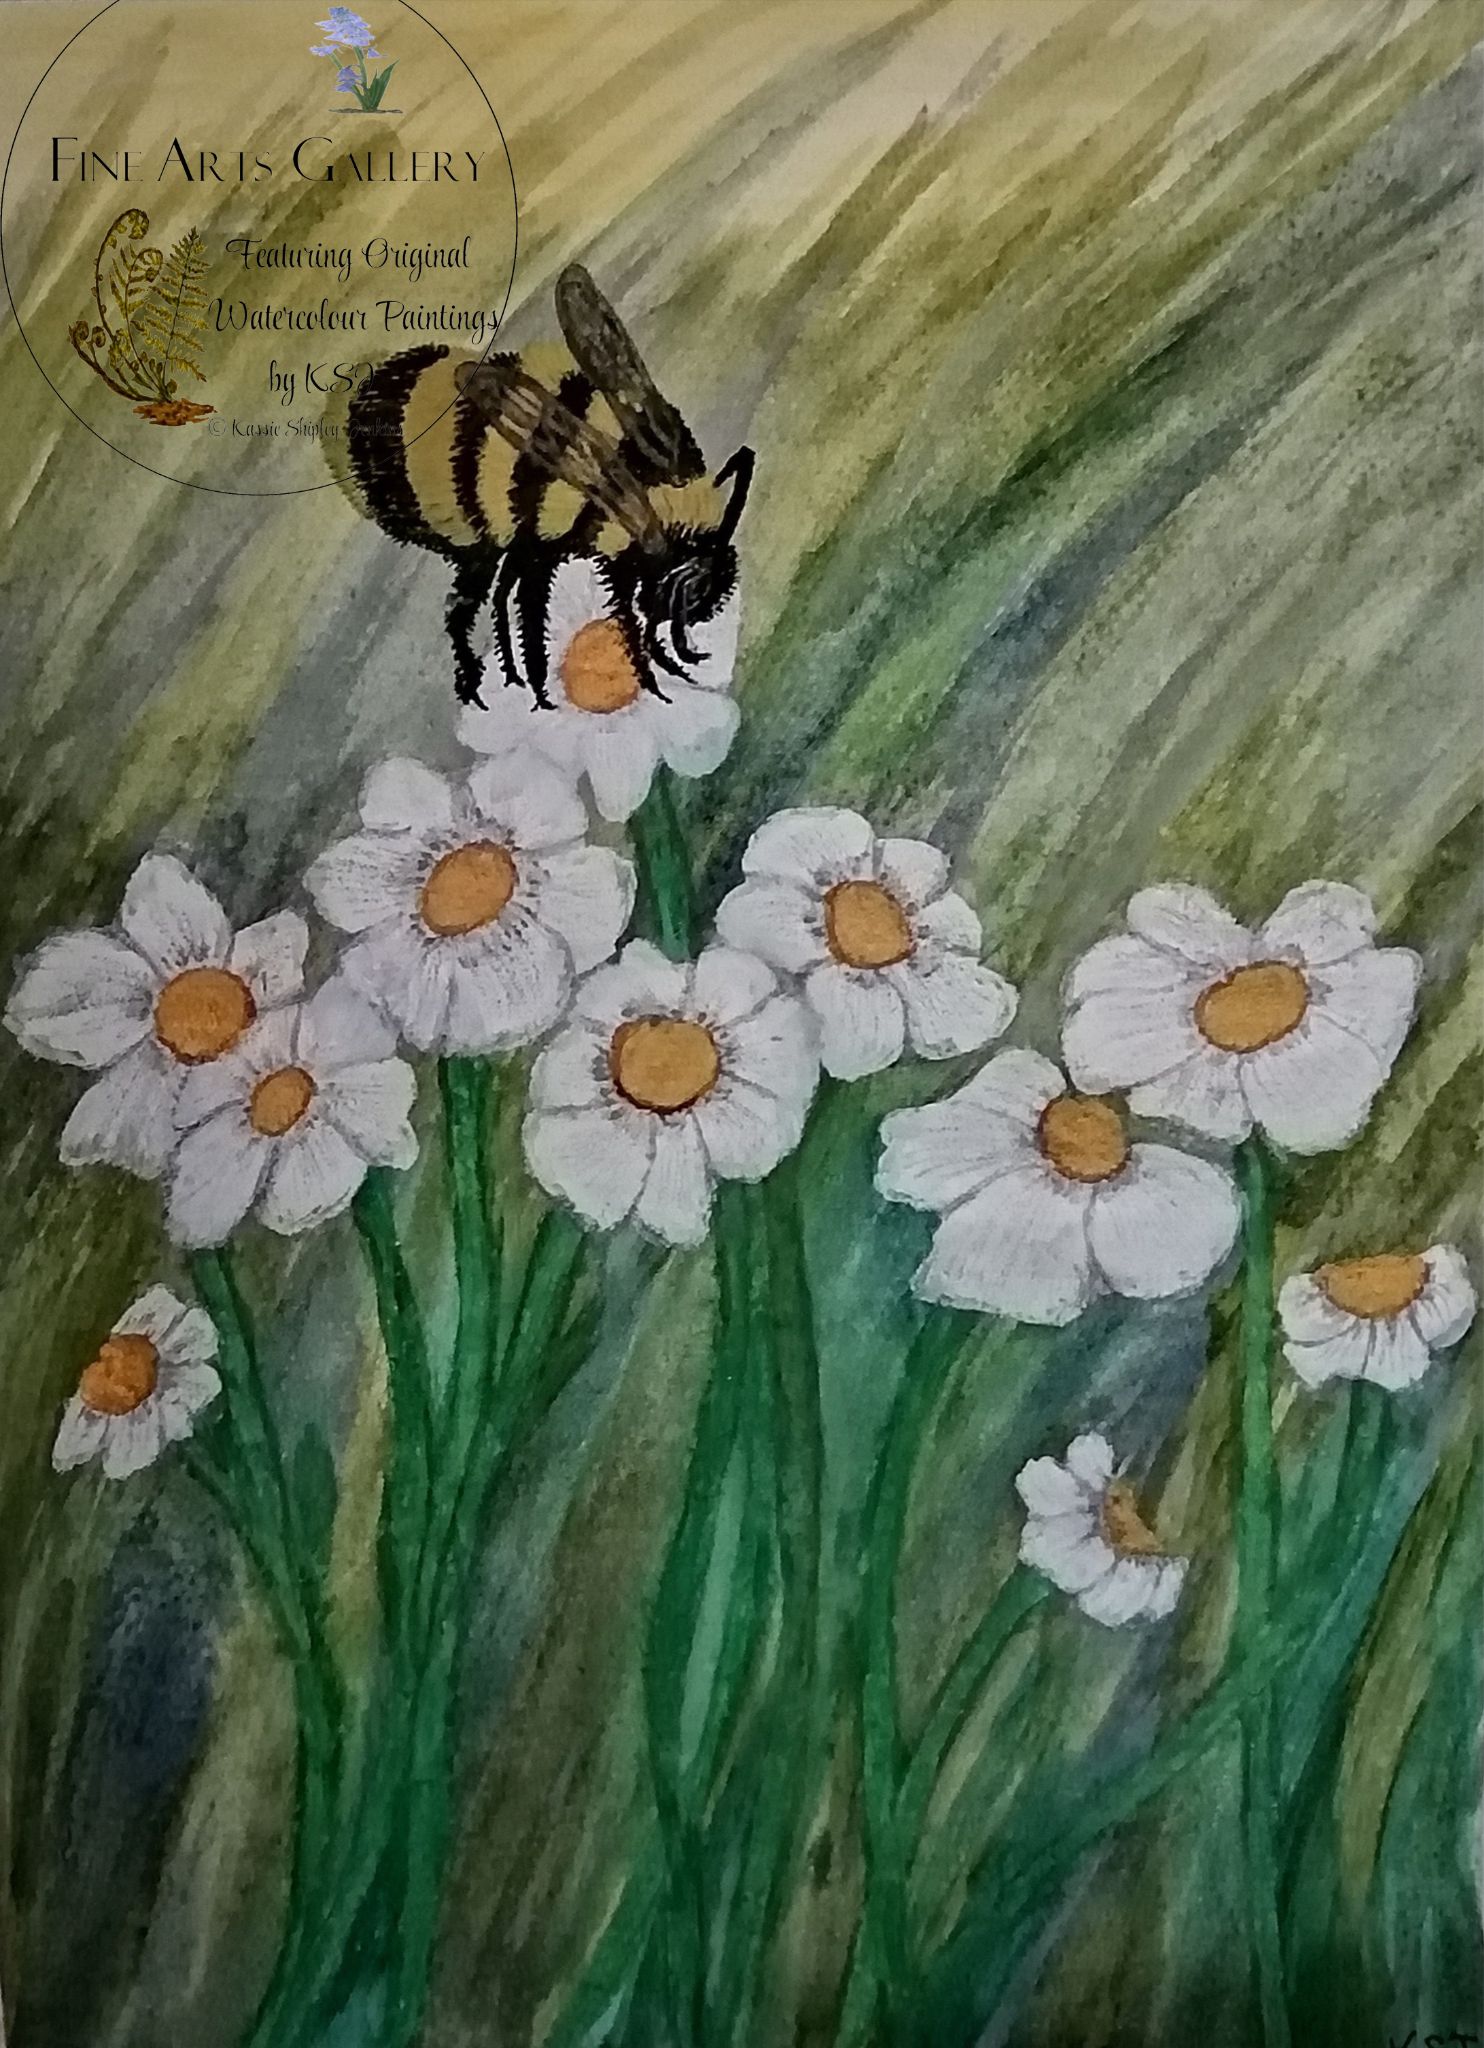 Bee on the Daisies